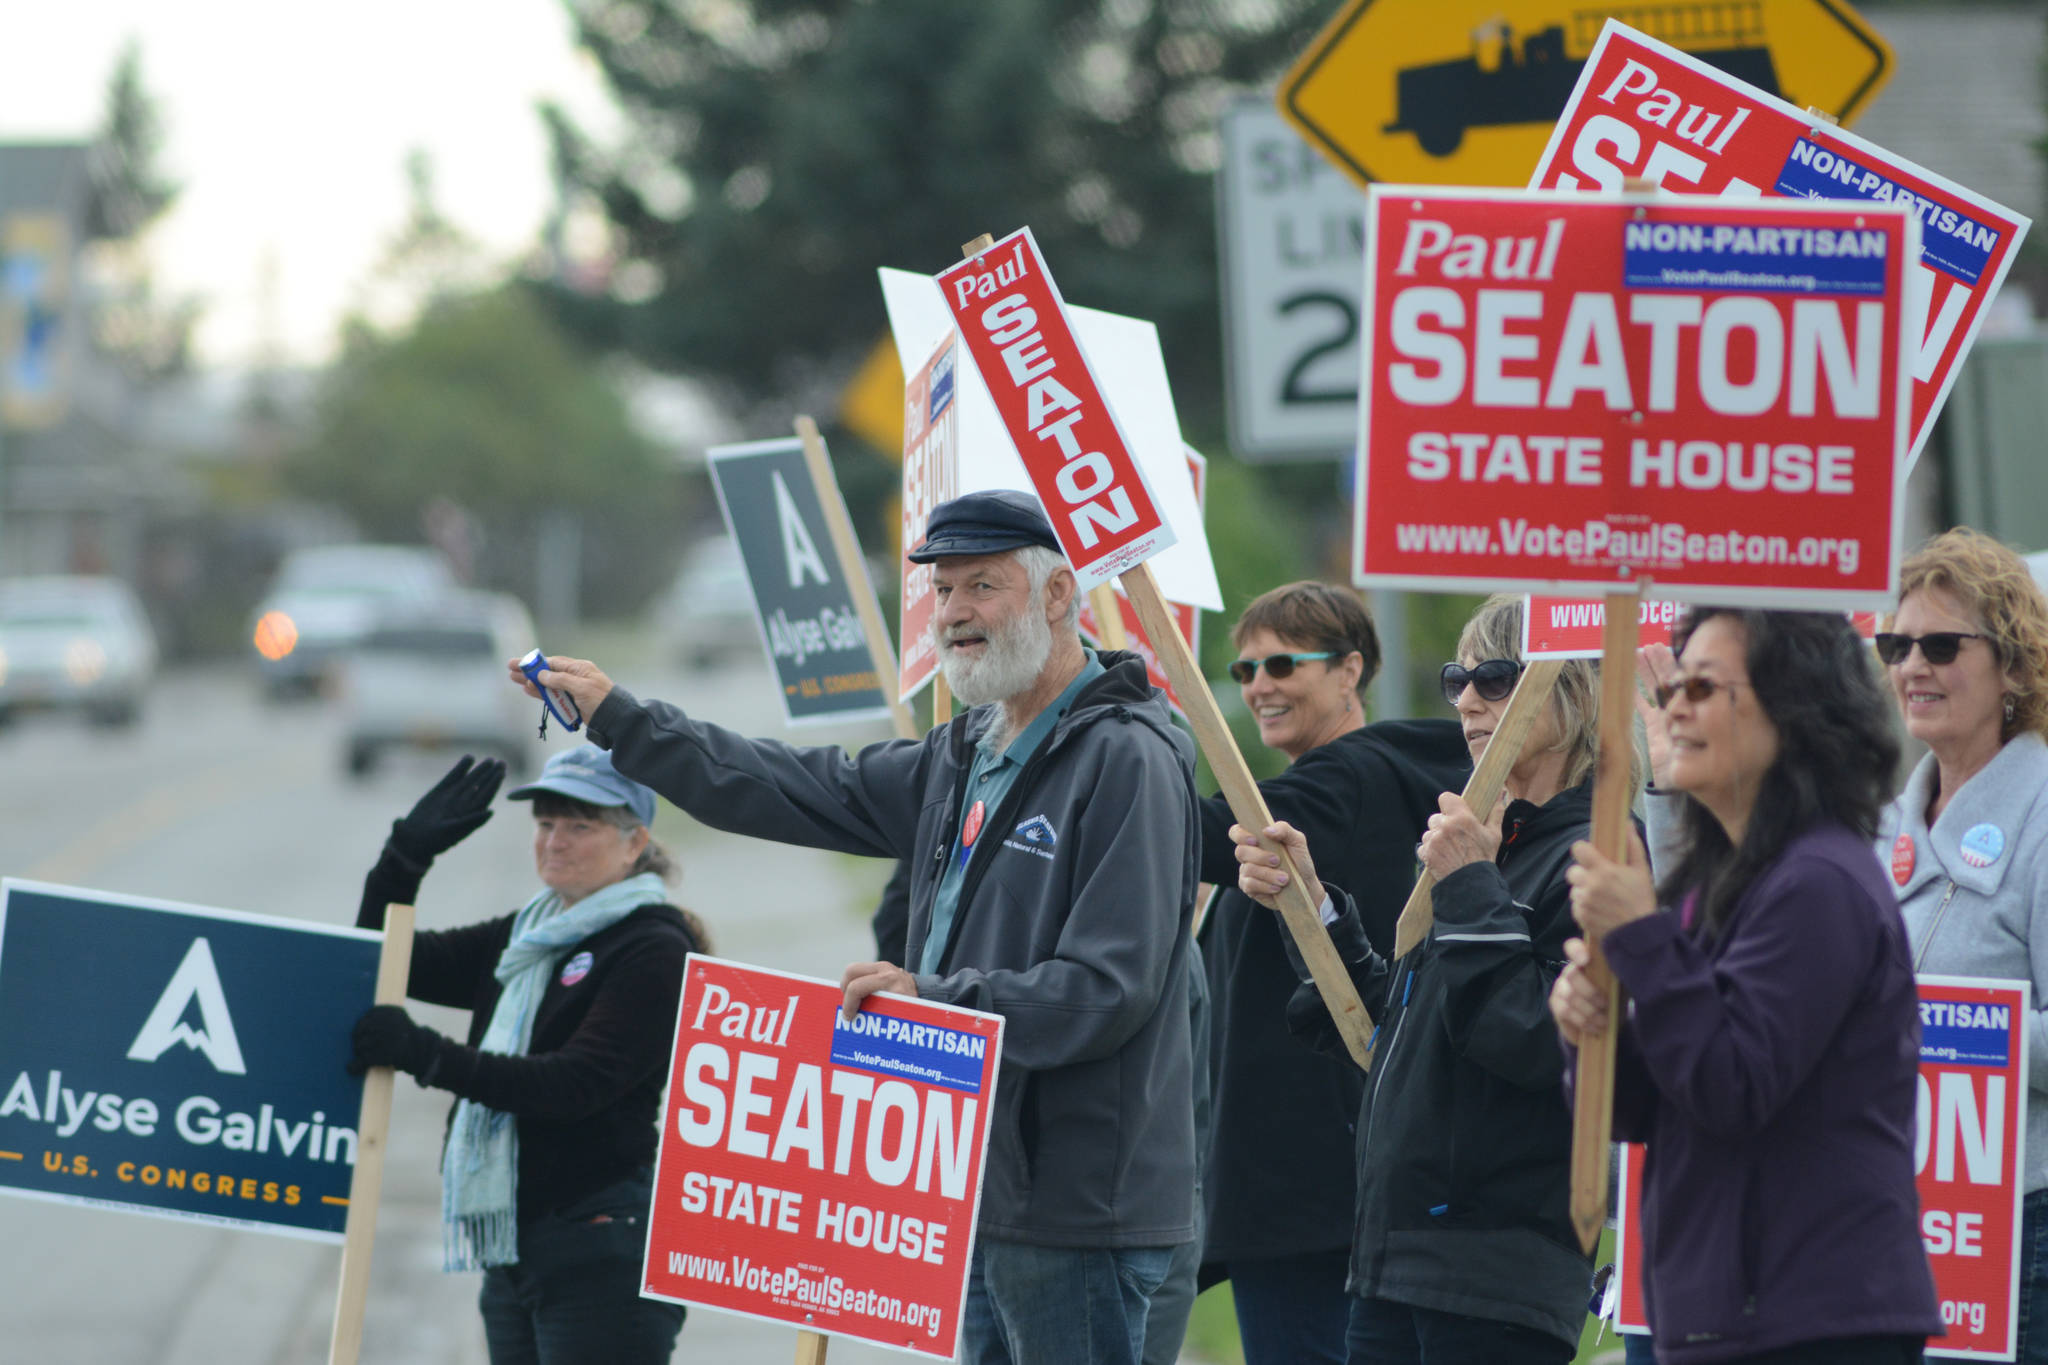 Rep. Paul Seaton, NP-Homer, center, is joined by supporters waving signs on primary election day, Aug. 21, 2018, at the corner of Lake Street and Pioneer Avenue in Homer. Seaton ran unopposed as a nonpartisan candidate for the Alaska Democratic Party seat. Also waving signs are supporters of Alyse Galvin, a nonpartisan candidate for the Democratic Party seat for U.S. Congress. Galvin won the Democratic Party nomination. (Photo by Michael Armstrong/Homer News)